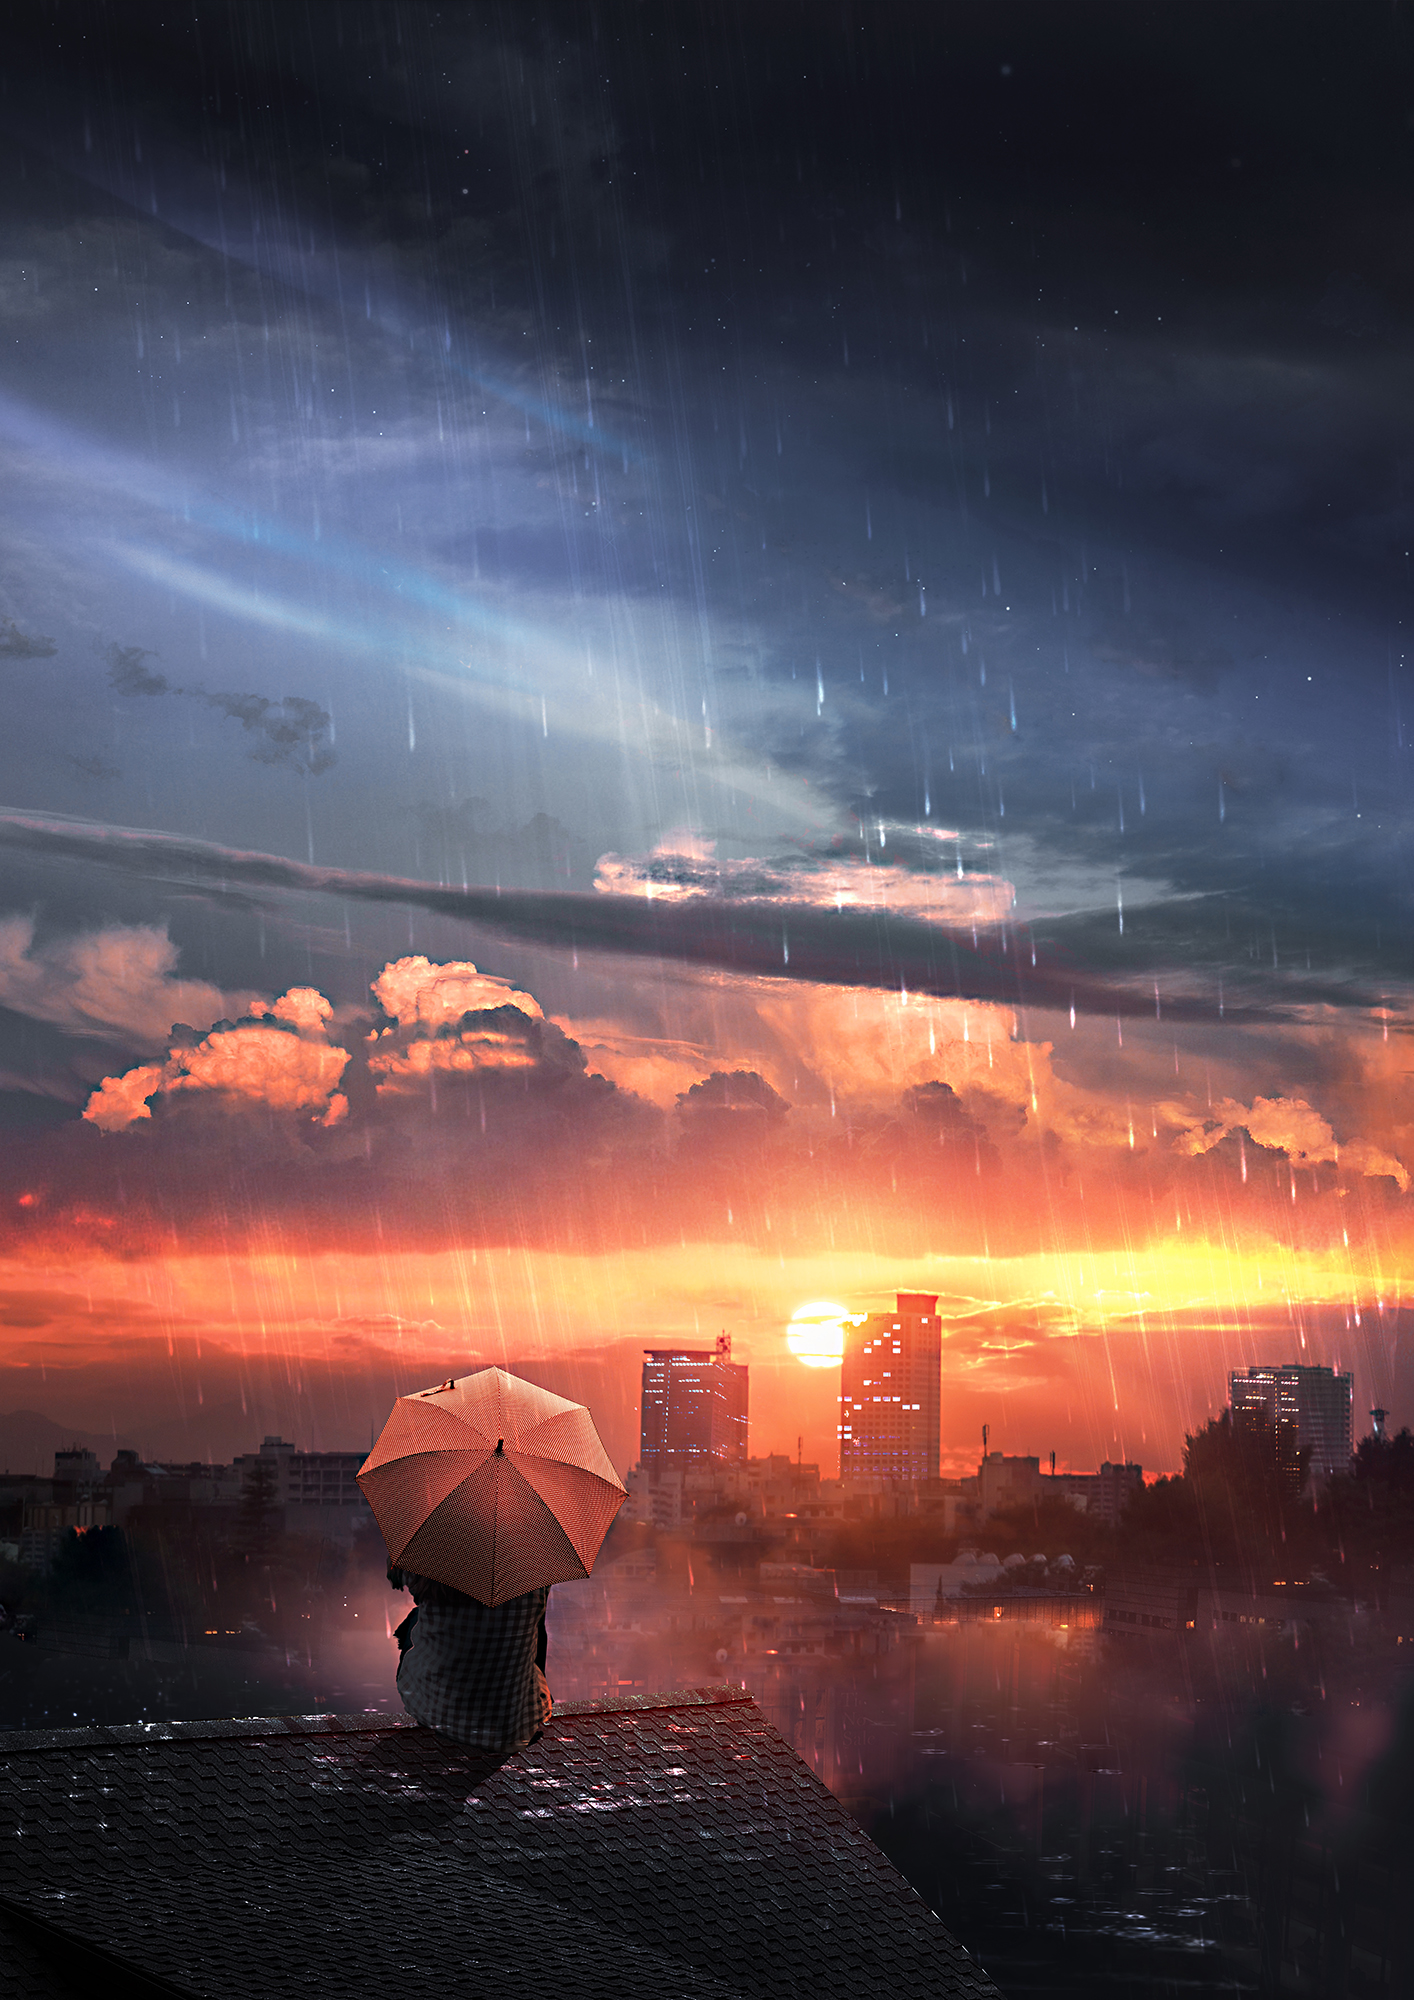 wallpapers rain, loneliness, art, privacy, night, roof, seclusion, sky, umbrella